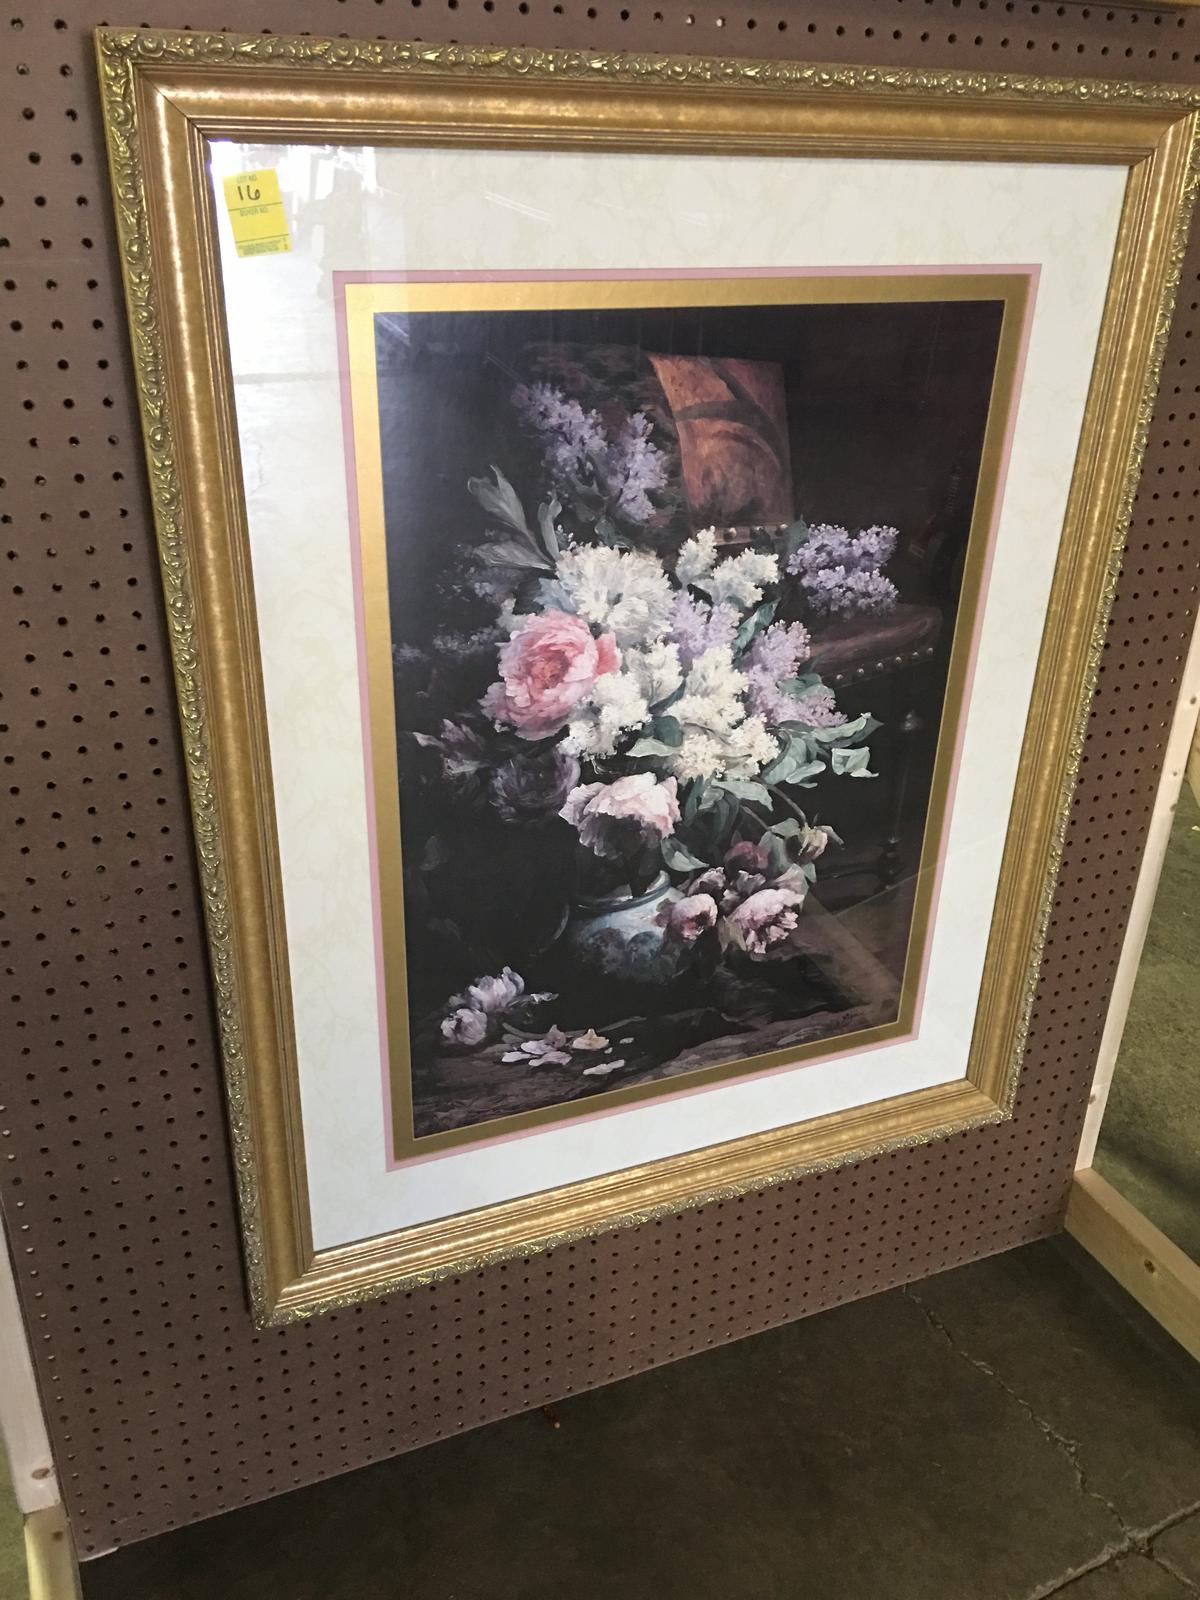 Matted & Framed Floral Print By Maude Is 34" x 40"